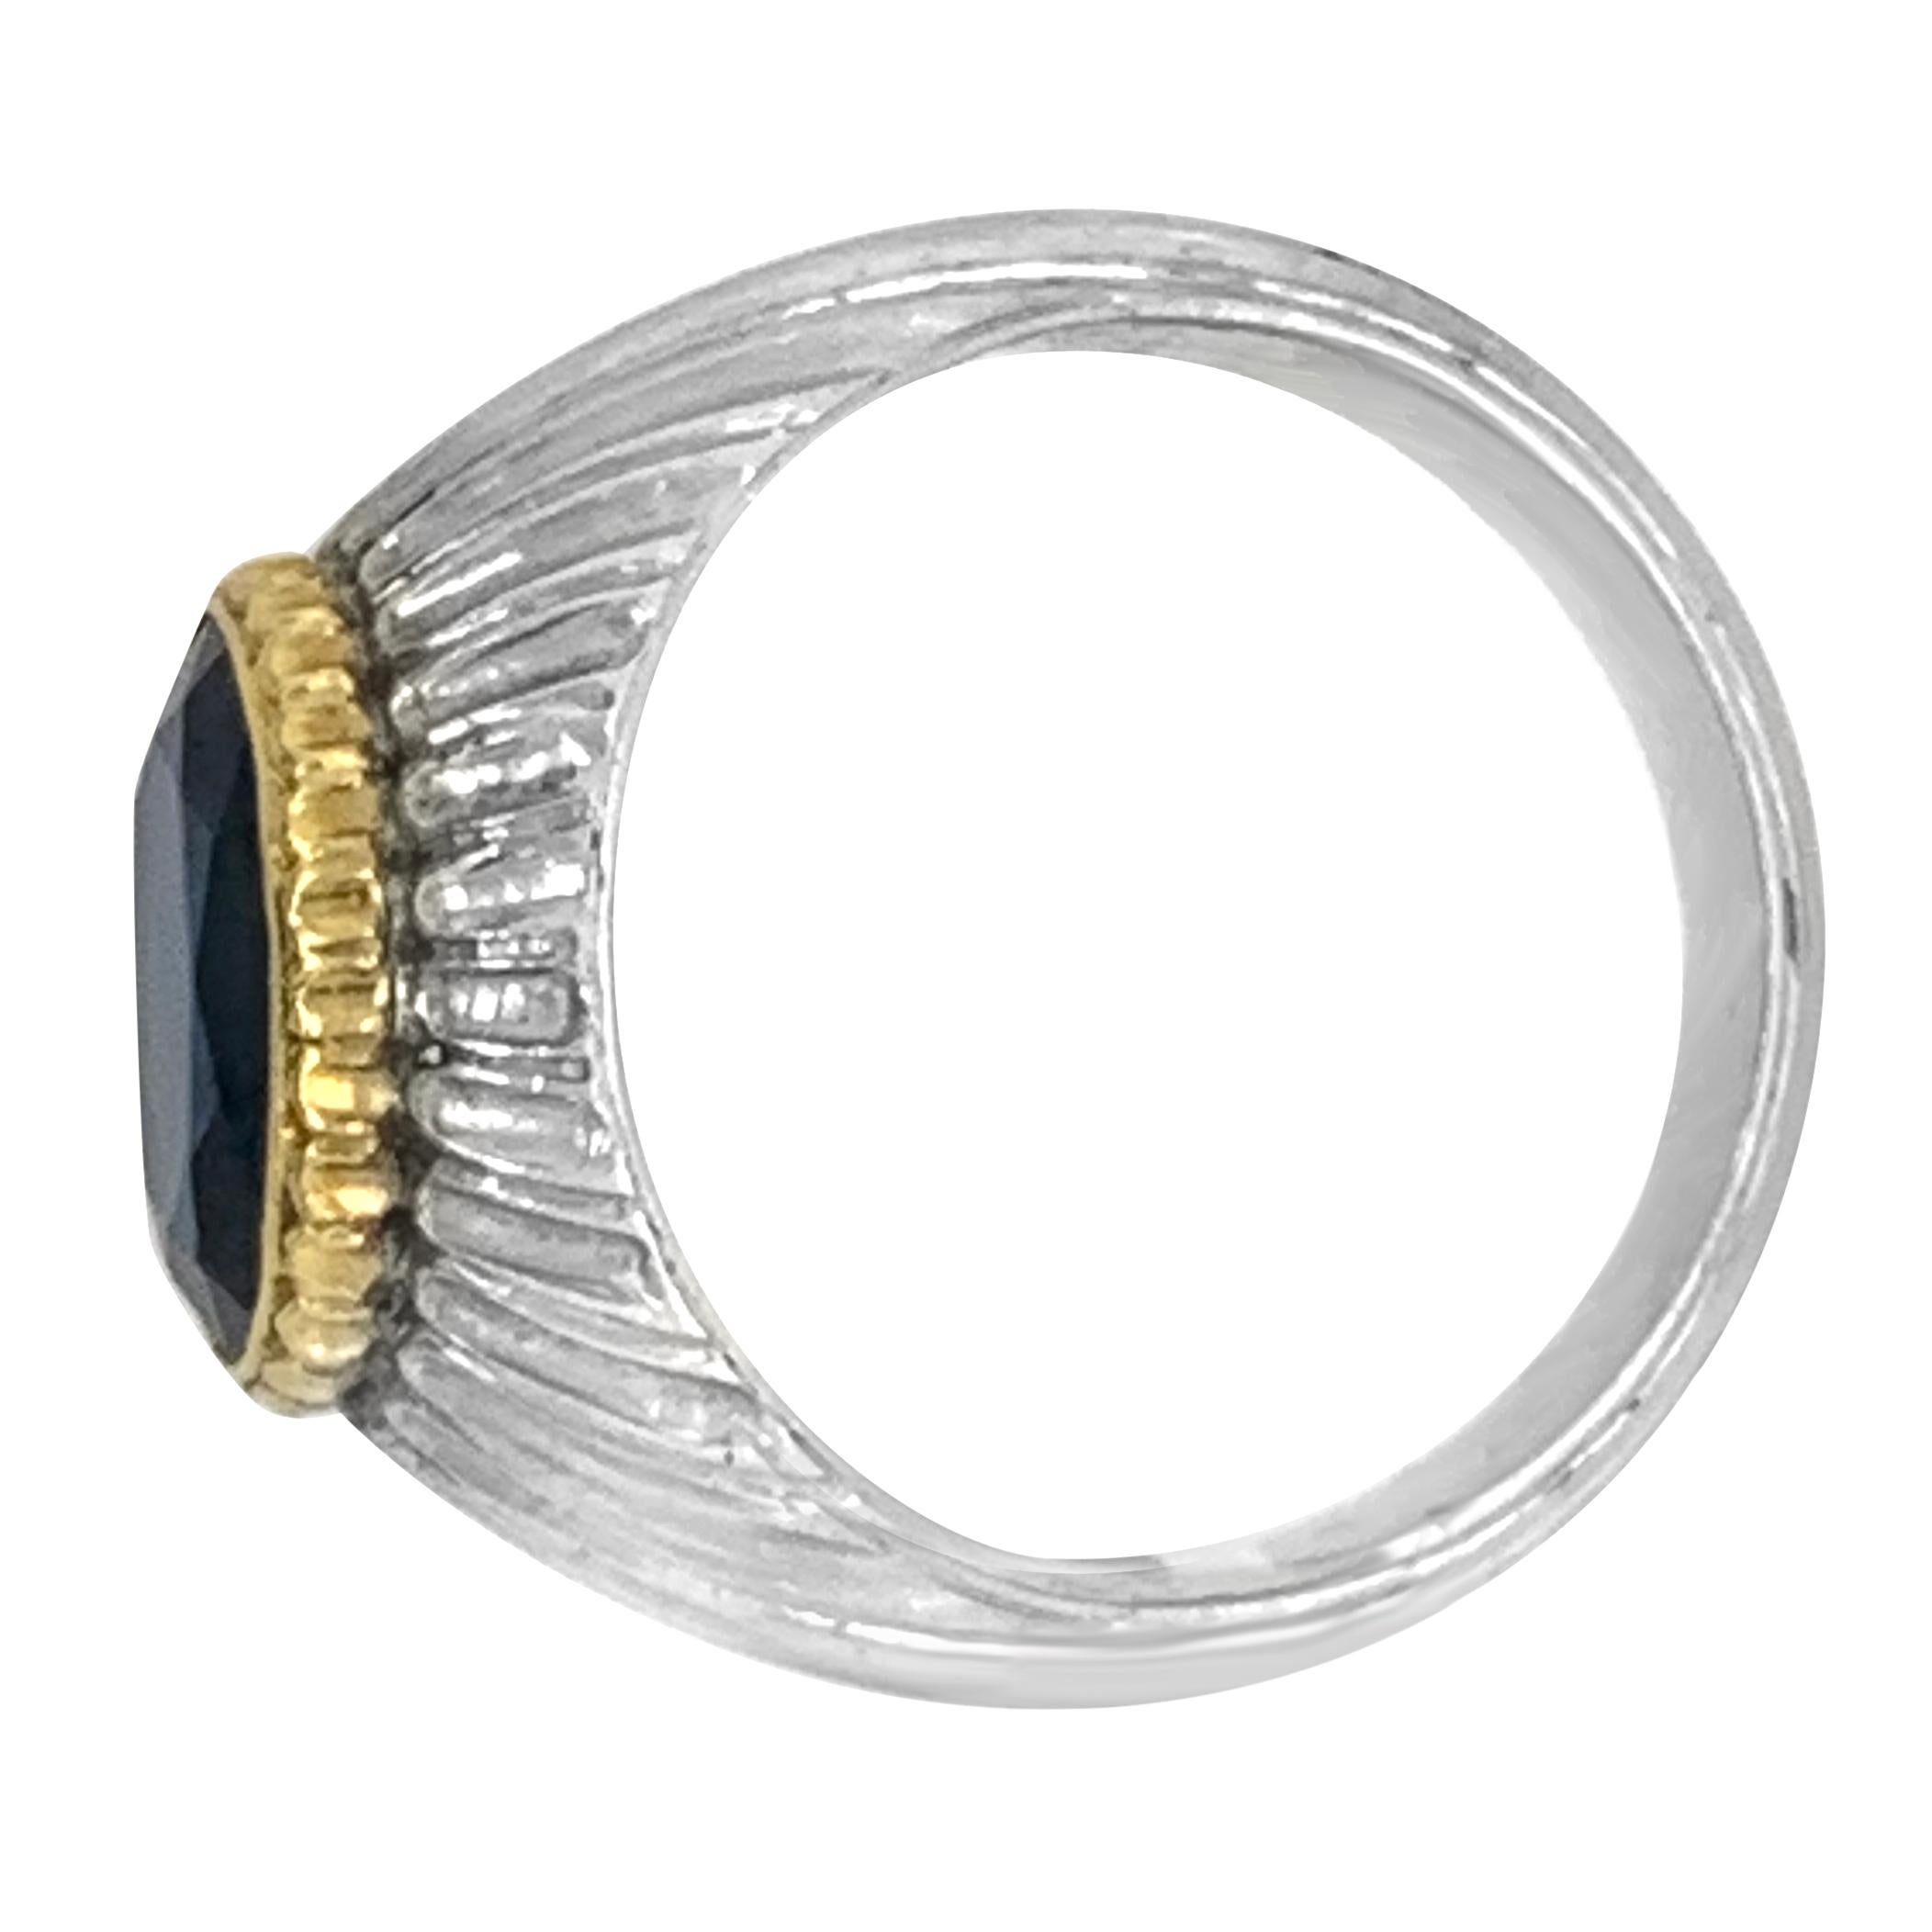 Material: 18k White and yellow Gold
Creator: Buccellati
Gemstone: Sapphire
Gemstone Weight: 4.5 CT
Medium Sapphire Tone
Date of Manufacture: 1970s
Total Weight: 6.9 g,ring size 7 
Item No:538